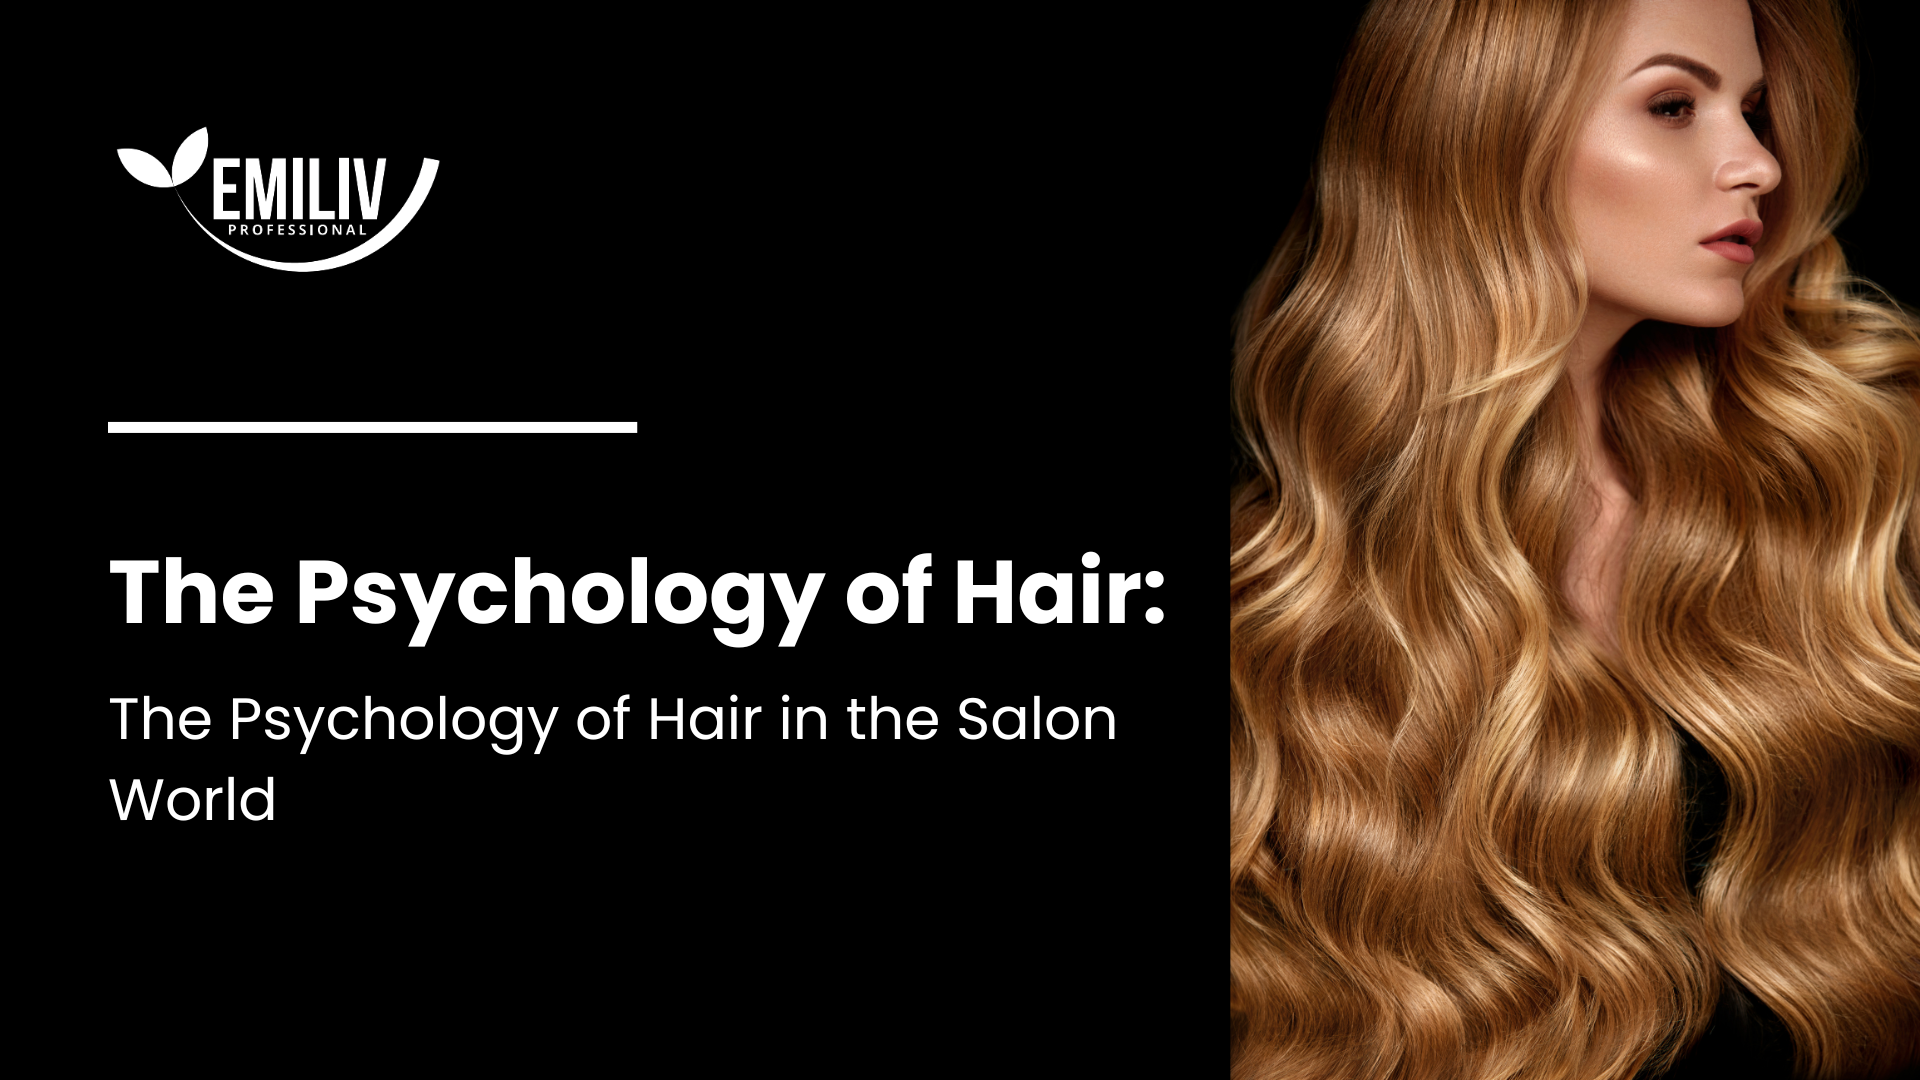 The Psychology of Hair